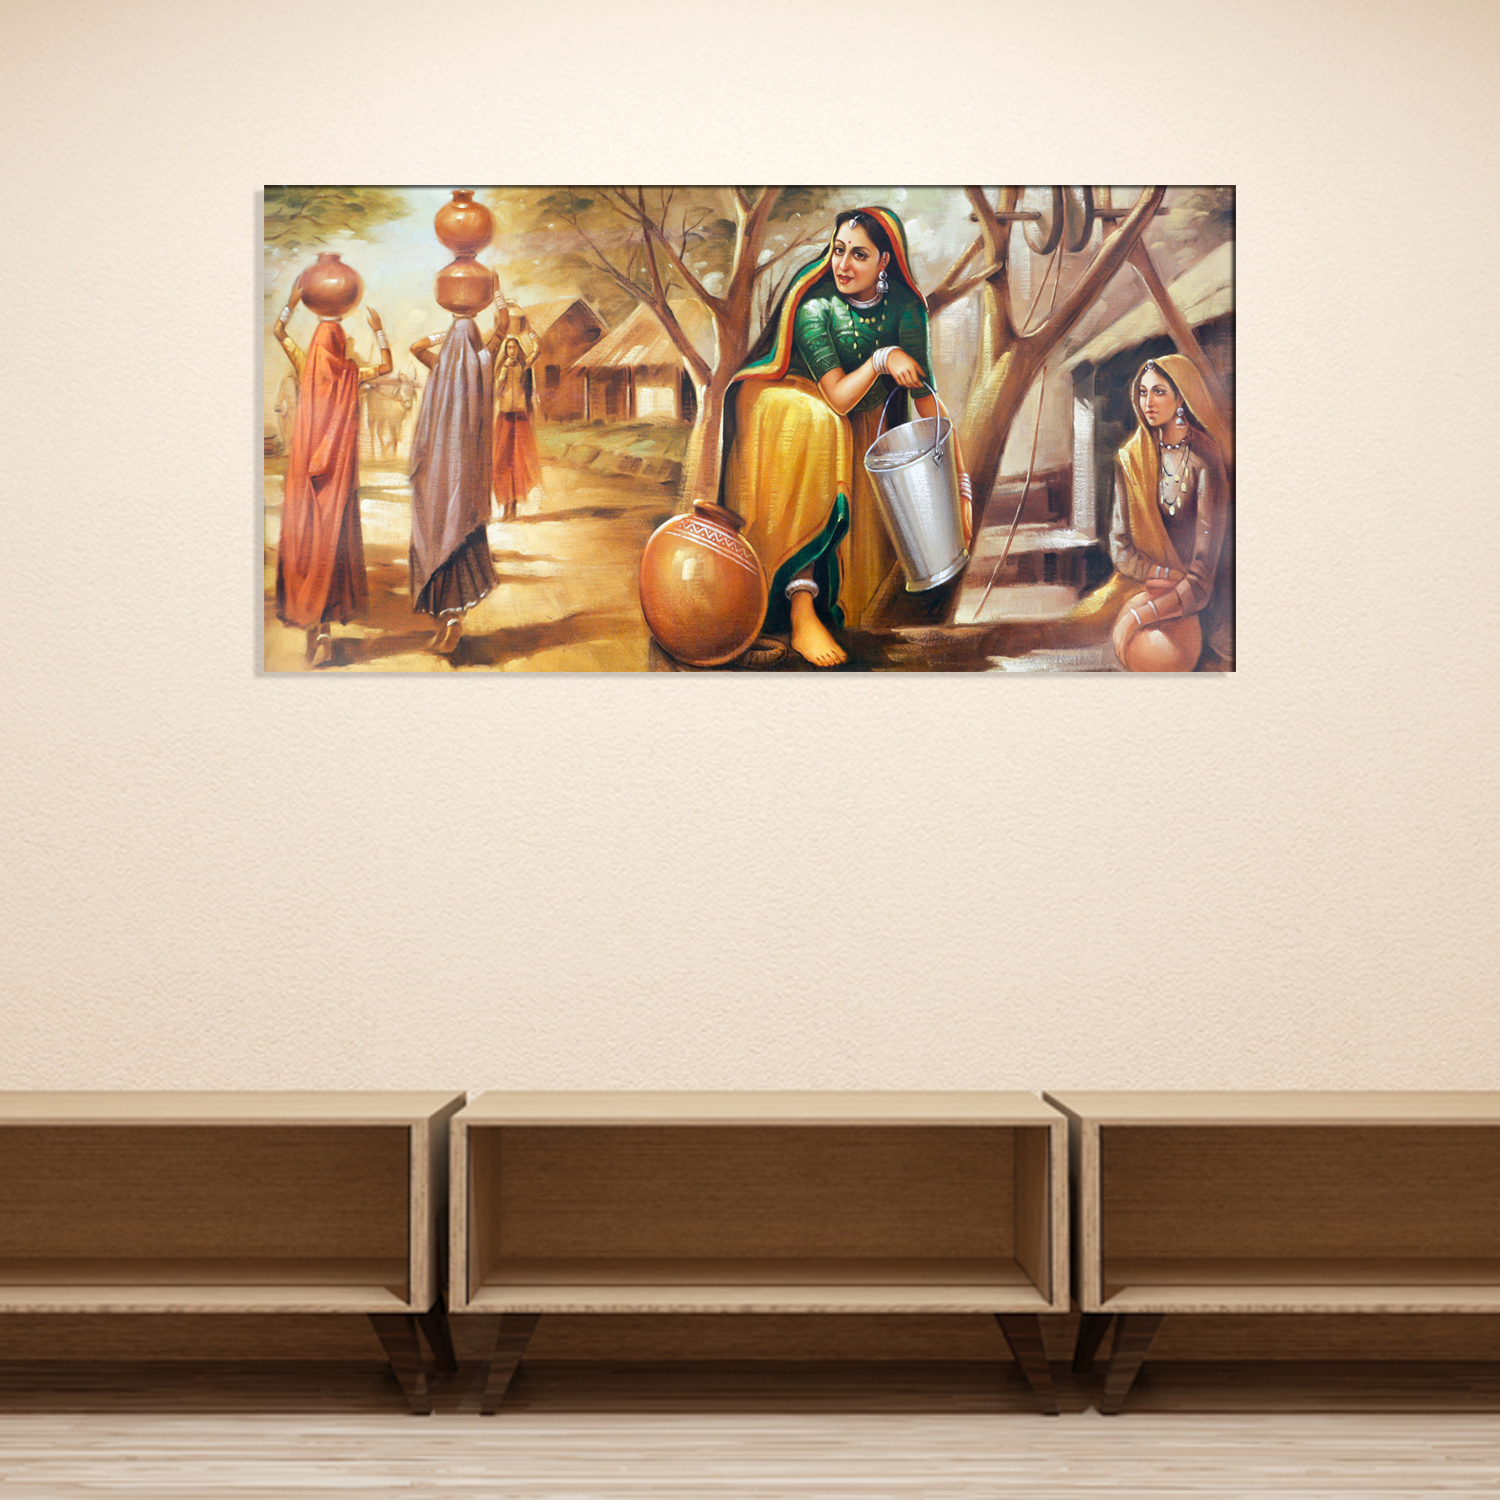 Woman Who is Filling Water in a Pot Abstract Canvas Print Wall Painting